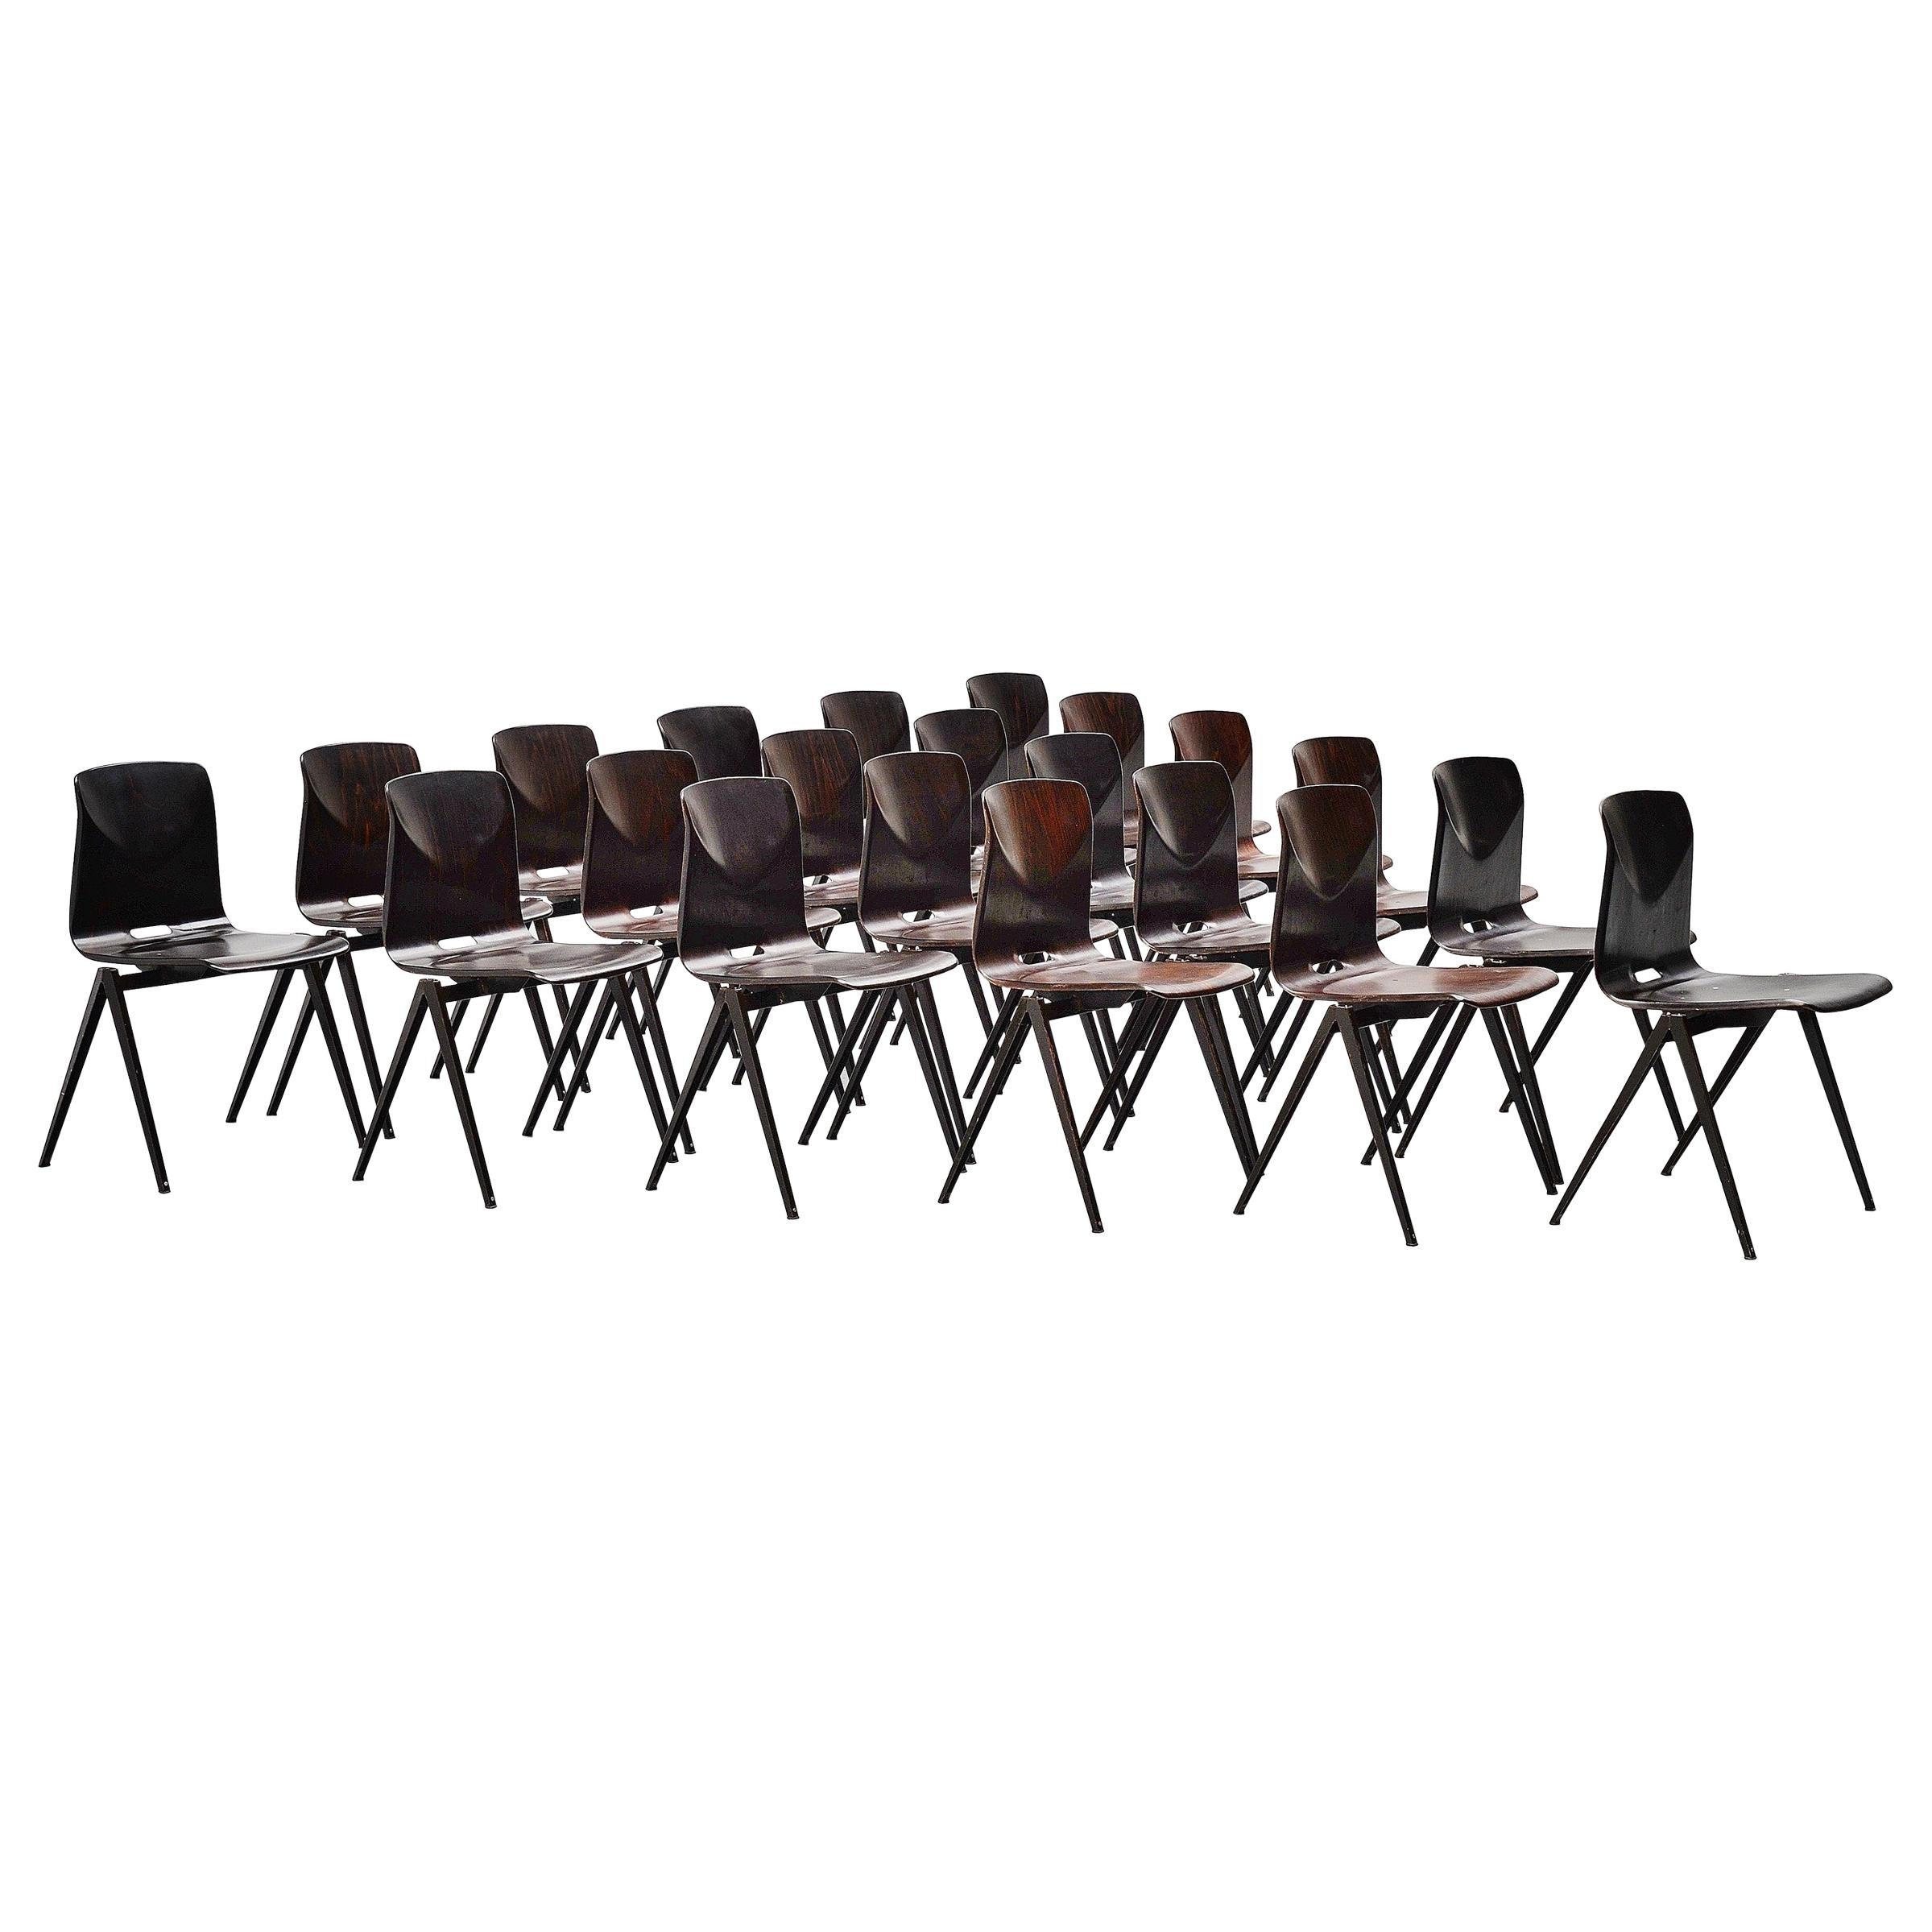 Pagholz Industrial Stacking Chairs Set of 22, Germany, 1970